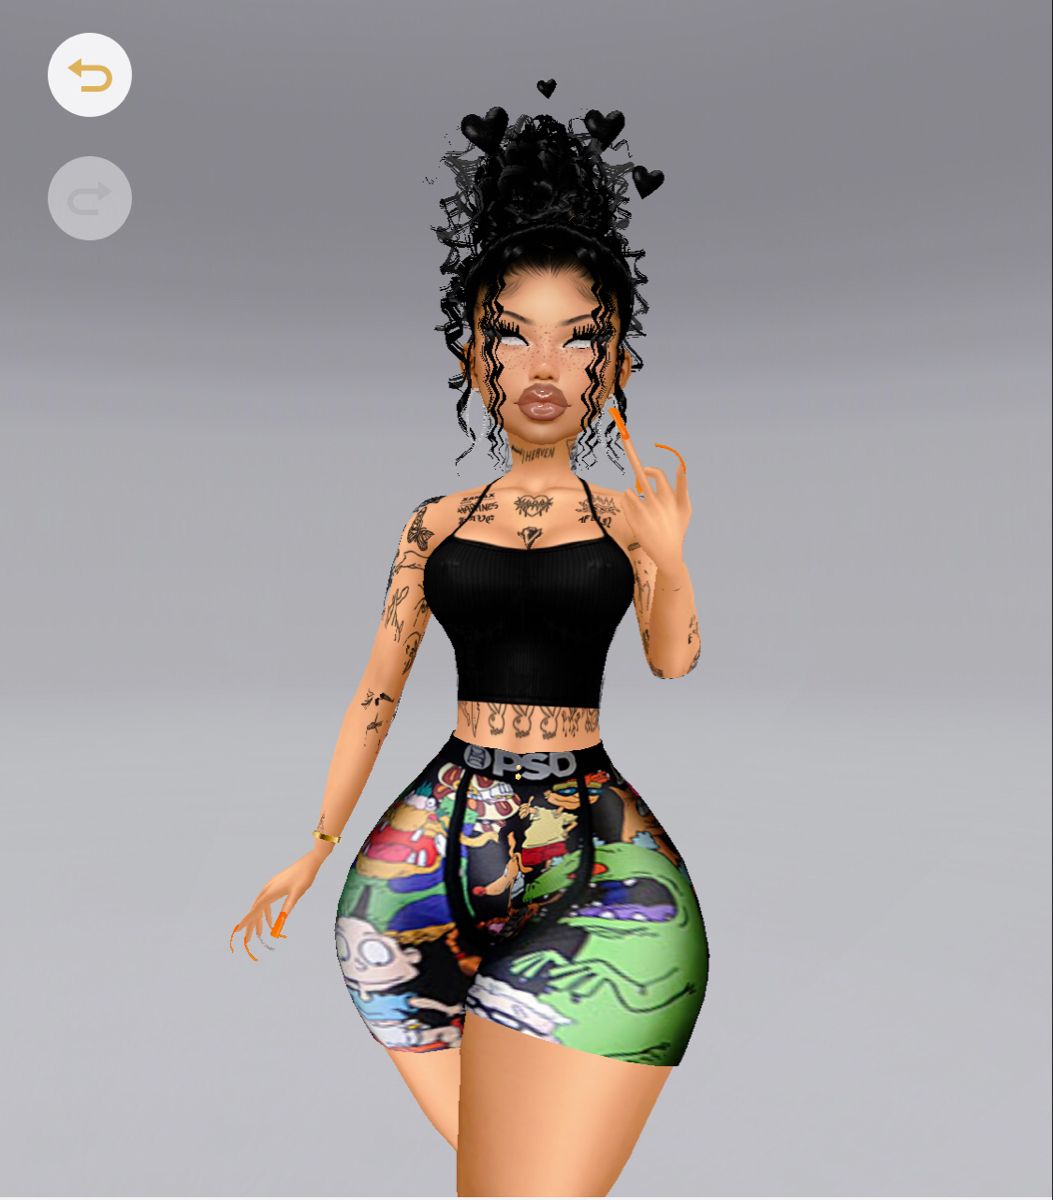 IMVU Outfits Wallpapers - Wallpaper Cave